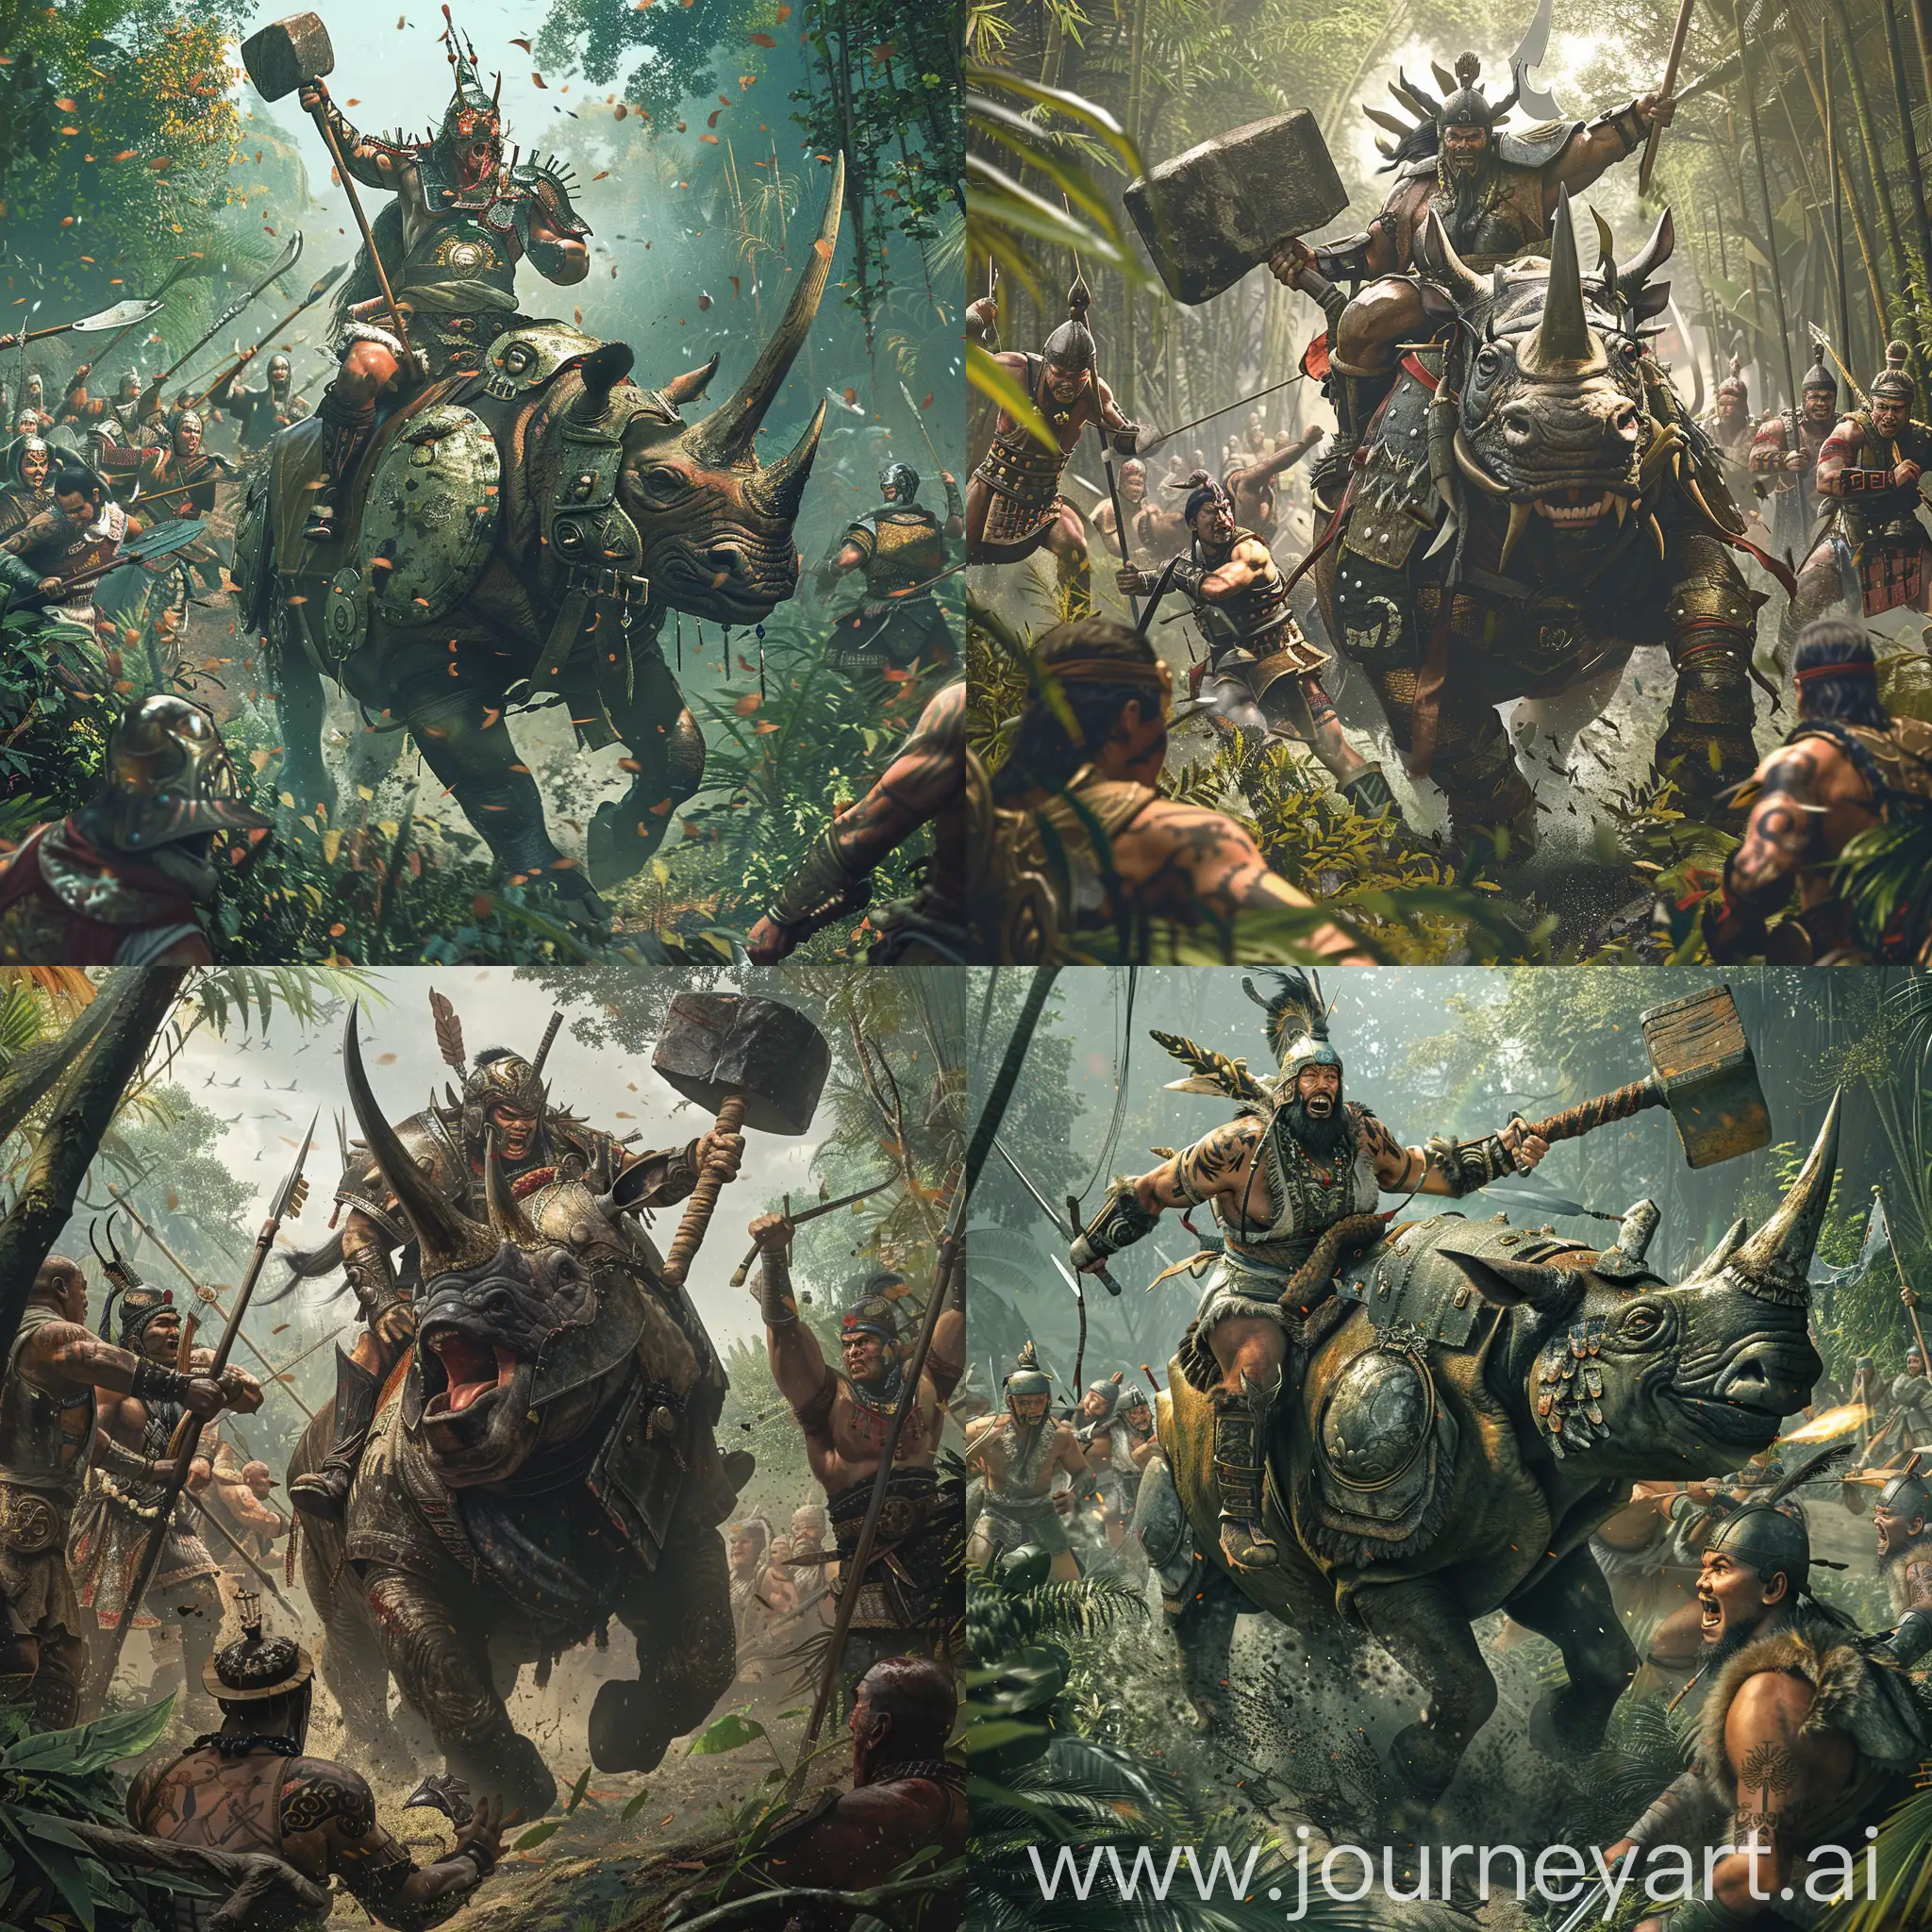 Chu-Warrior-on-Armored-Rhinoceros-Confronts-Qin-Soldiers-in-Southern-Jungle